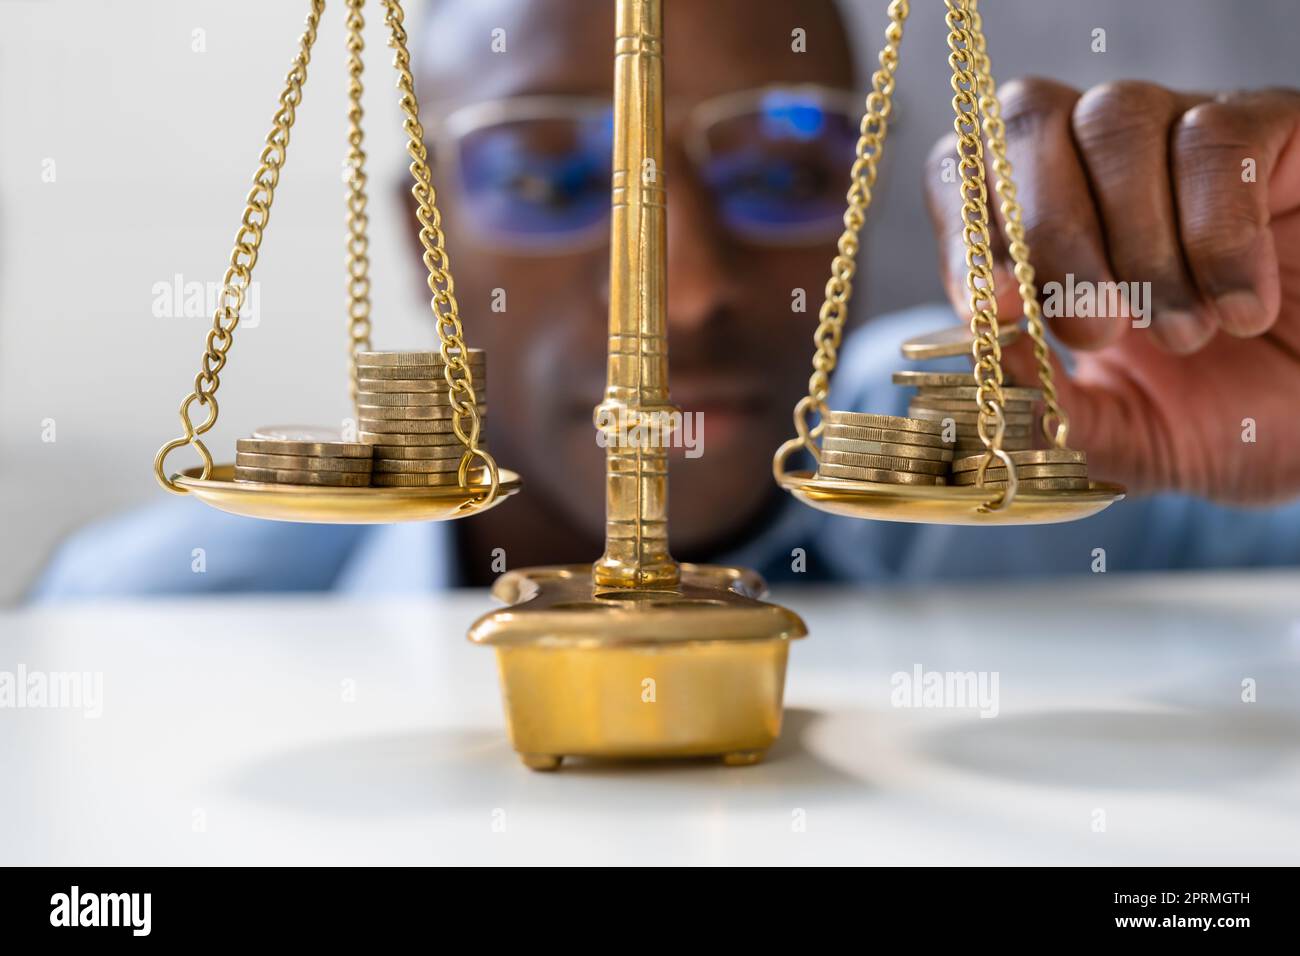 Weighing scales with dollars and drugs Stock Photo - Alamy